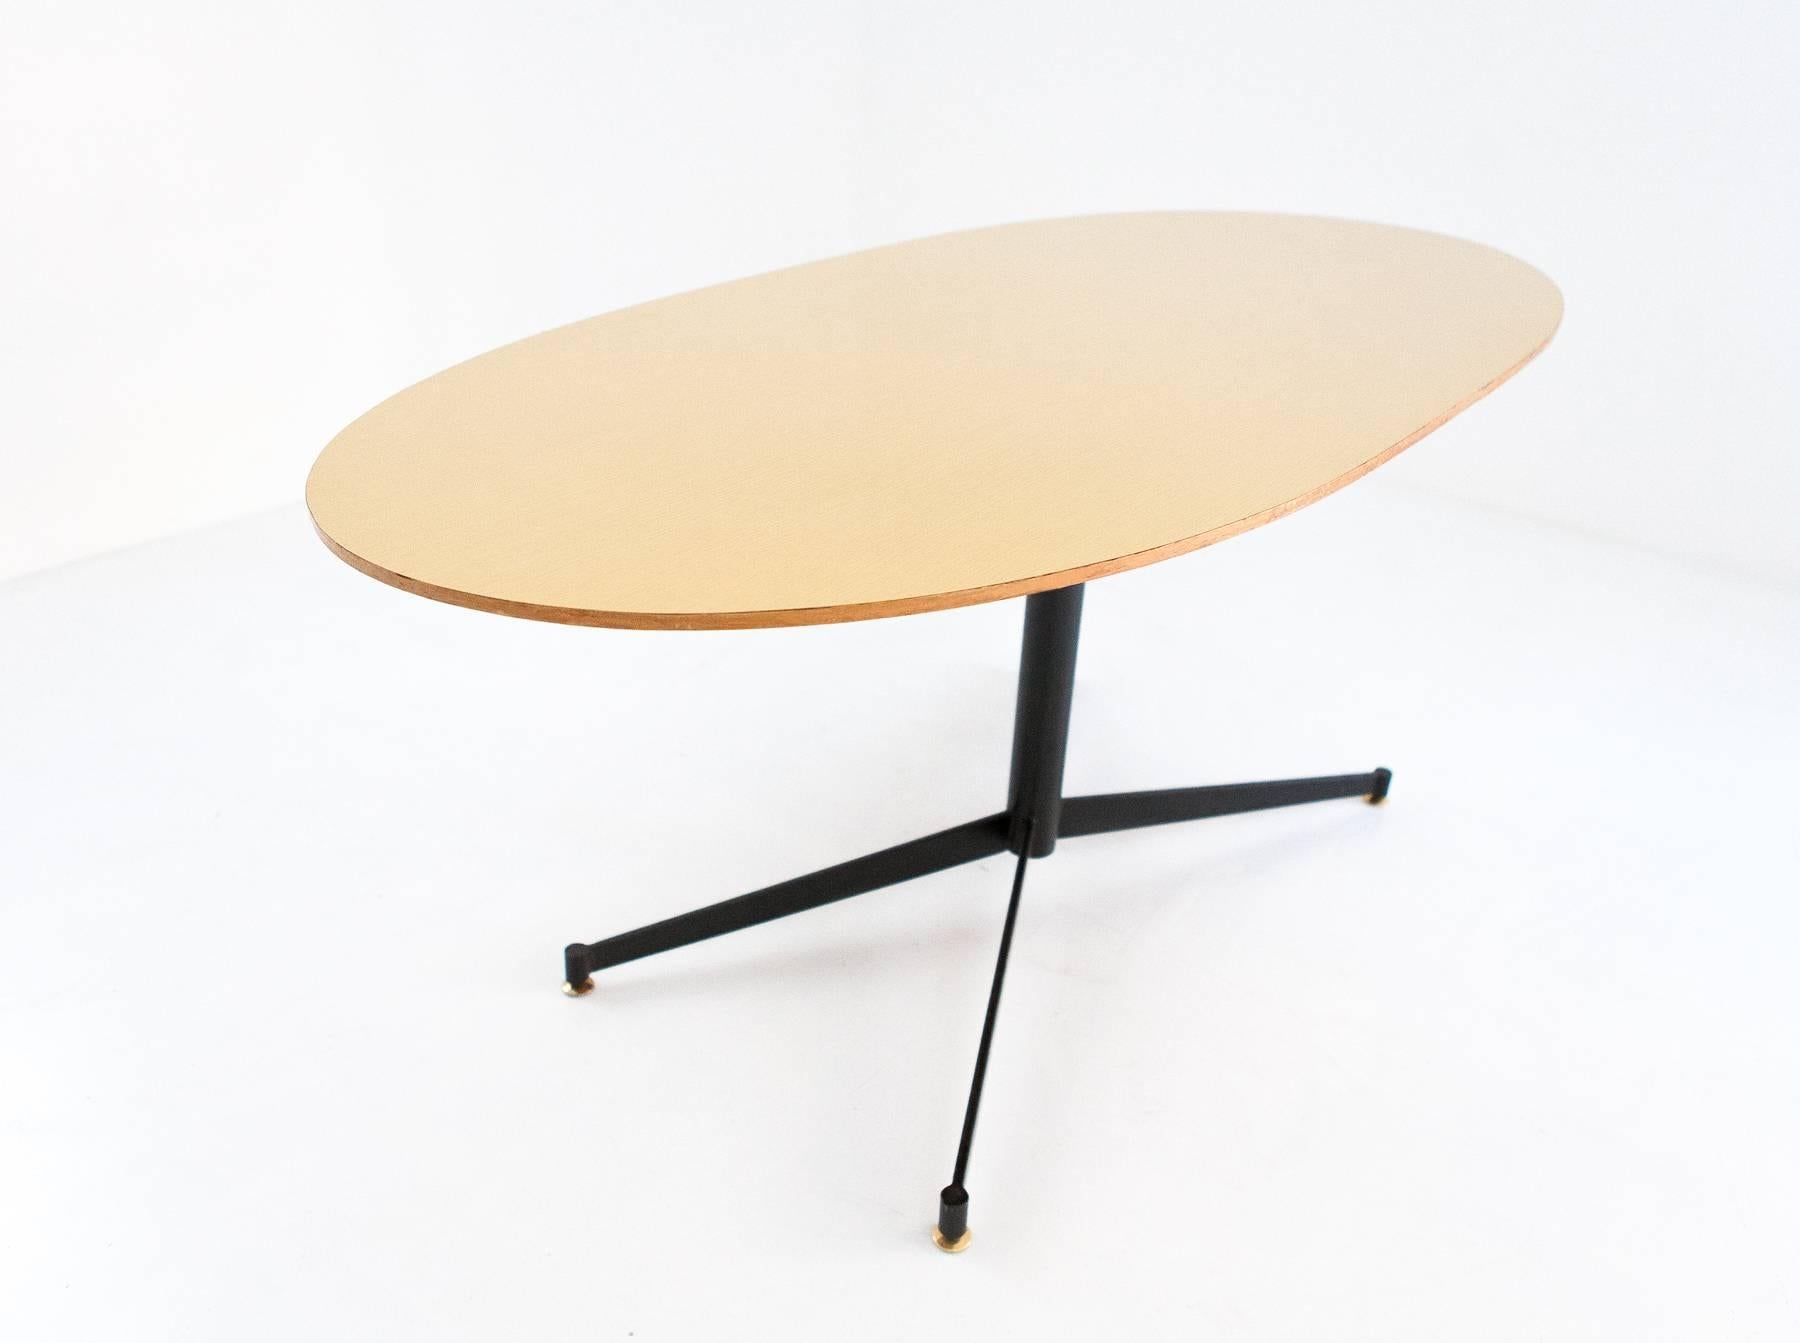 Italian Mid-Century Modern table, 1950s
Iron frame, brass feets and wooden top laminated in formica.
 